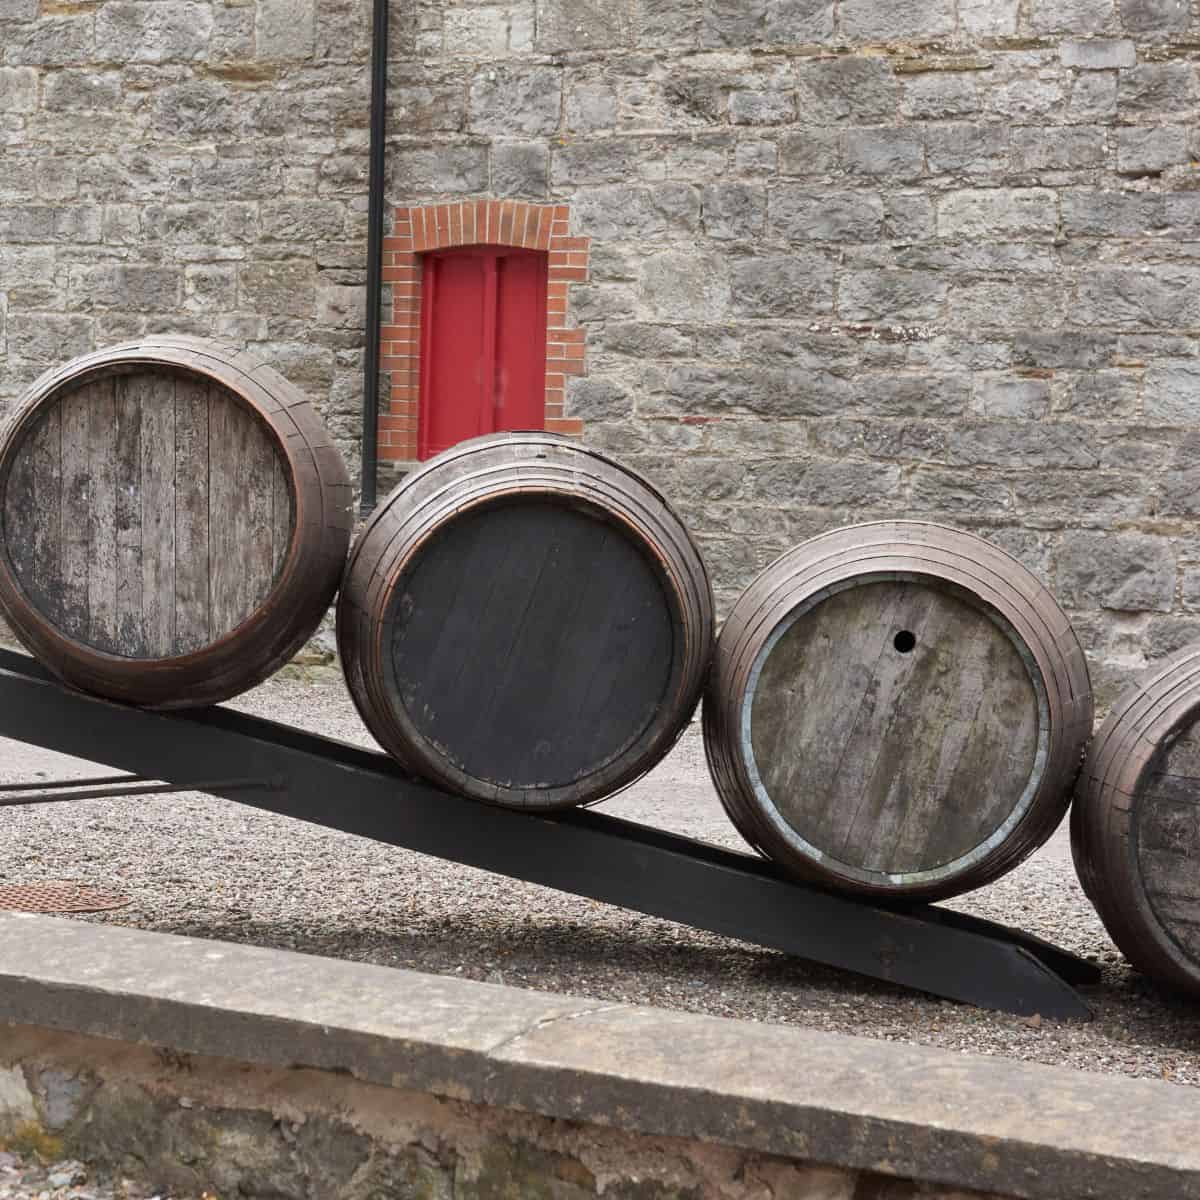 Whiskey Barrels on Ramp in front of stone building with red door